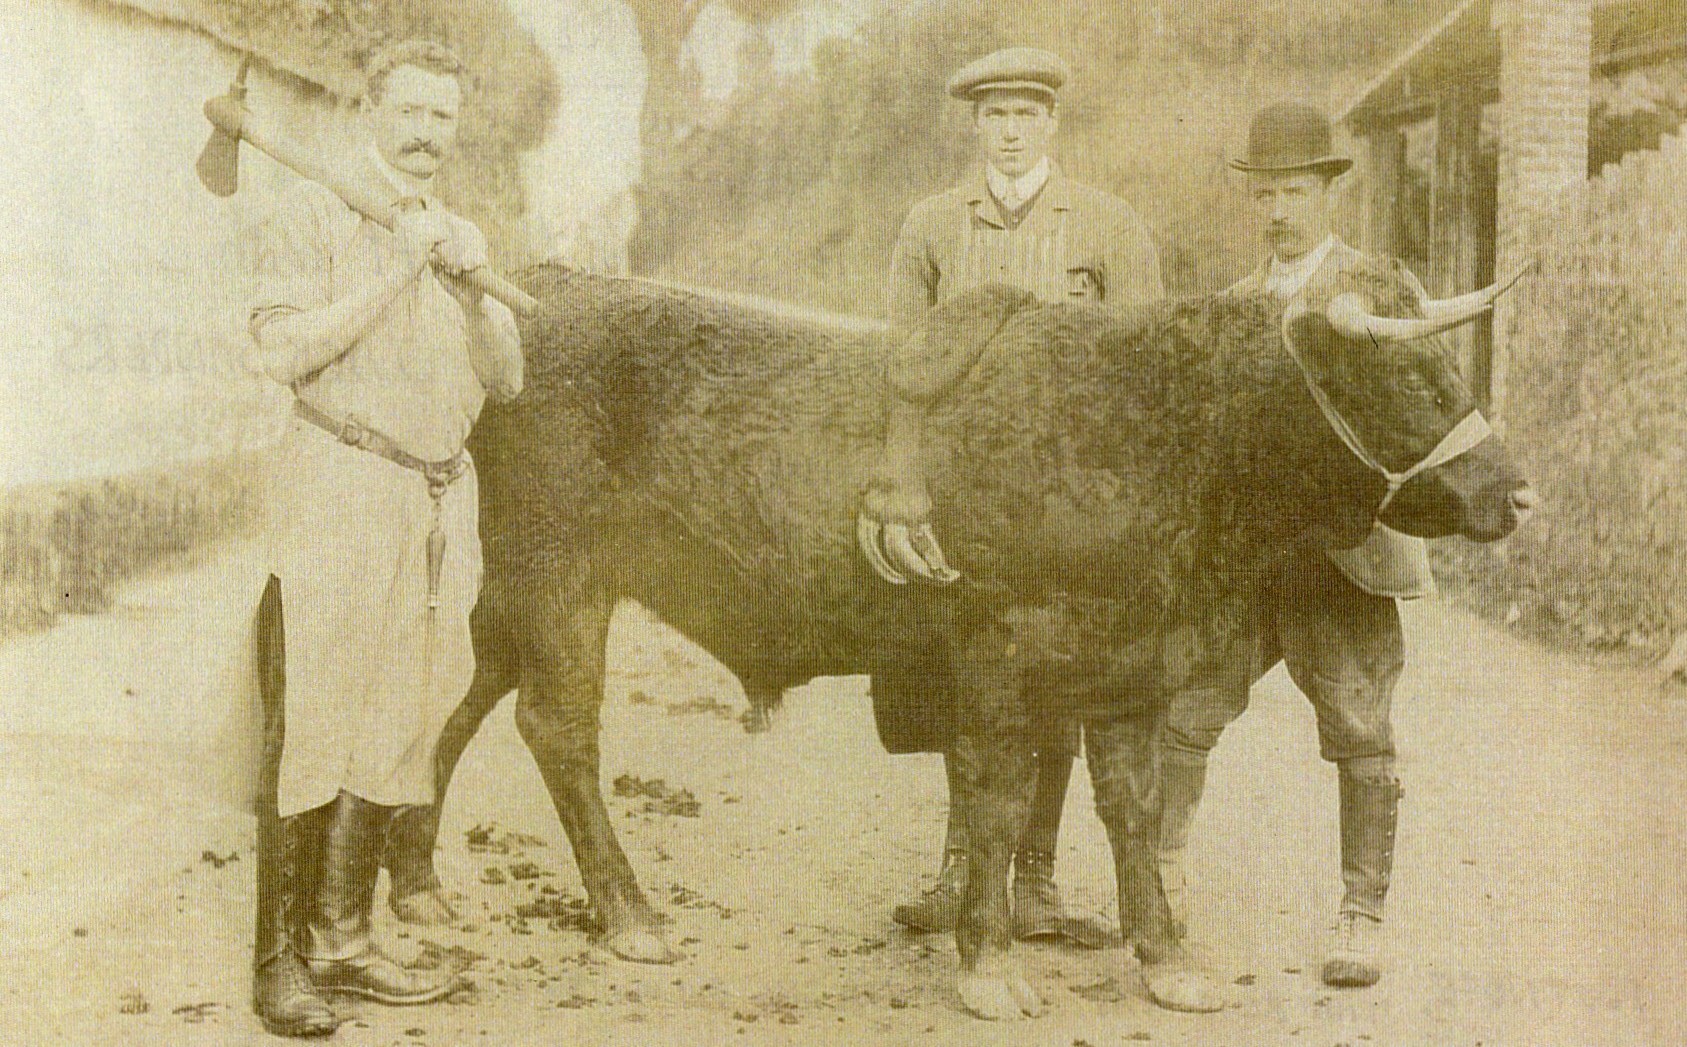 Butcher J G Blackmore with 'The Bullock with 5 legs'